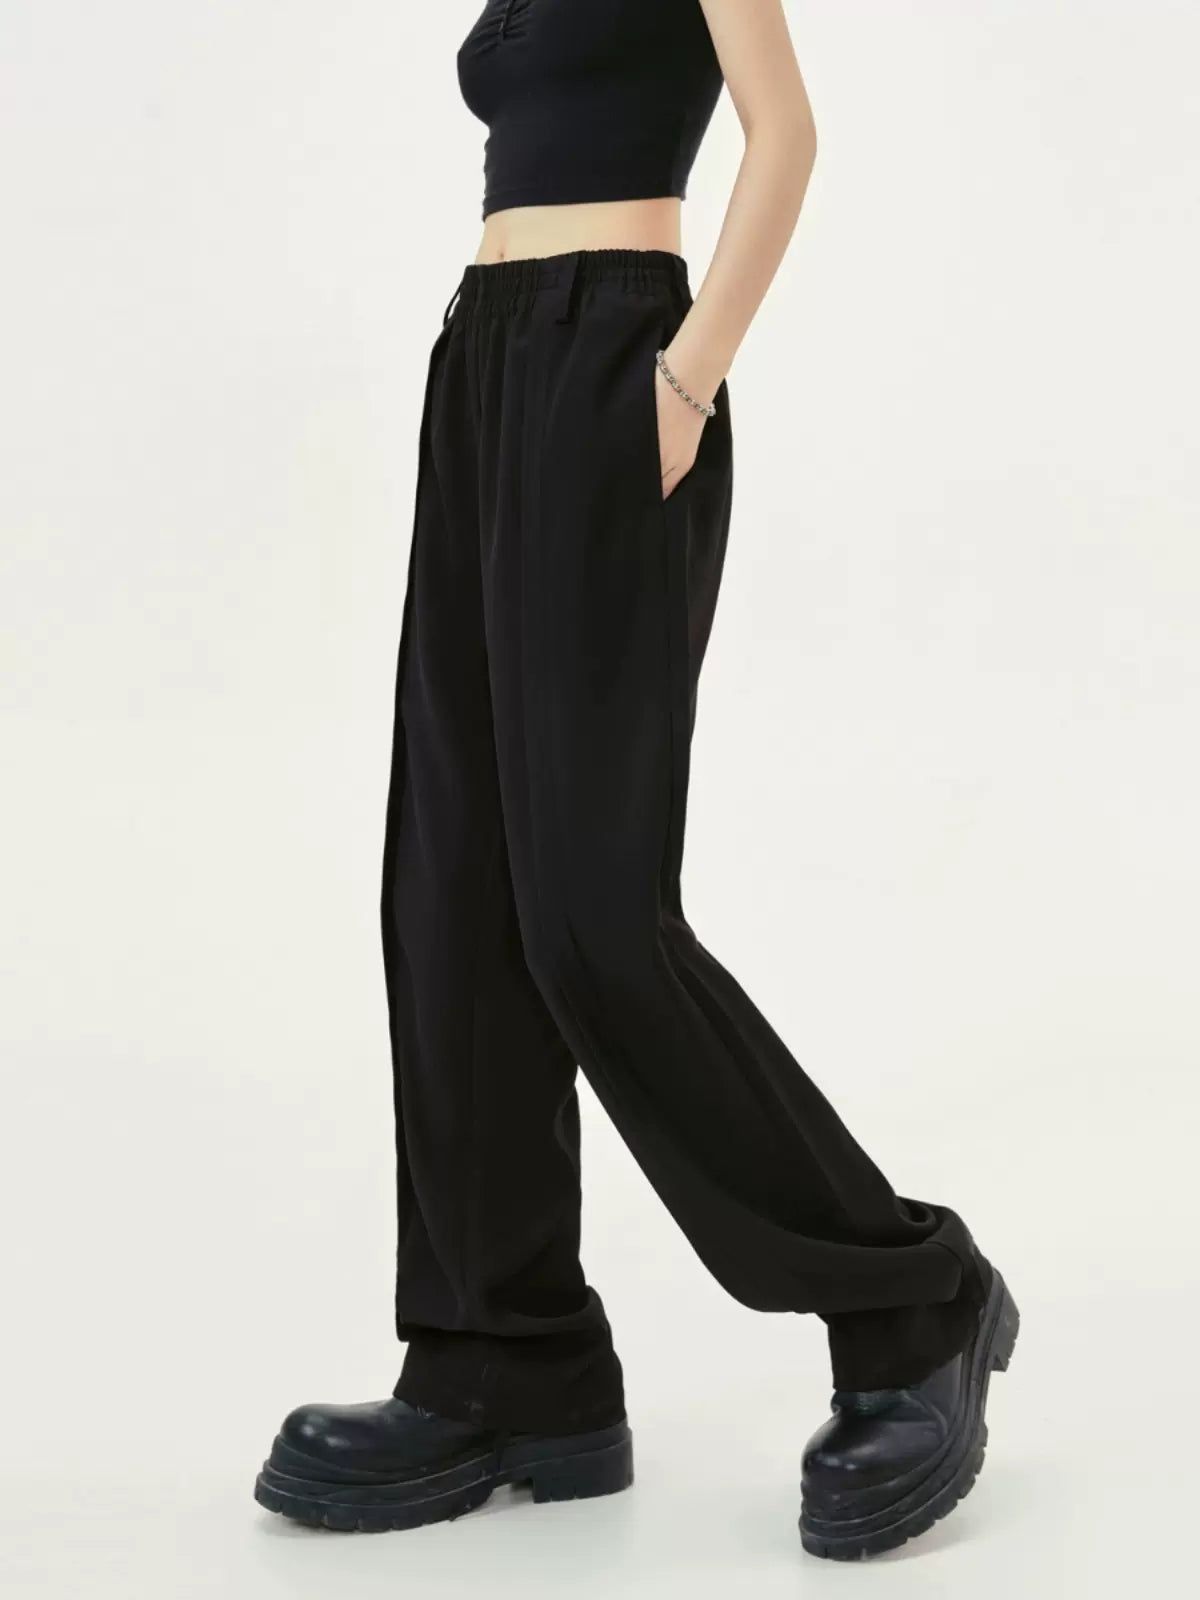 Straight Leg Bootcut Pants Korean Street Fashion Pants By Made Extreme Shop Online at OH Vault